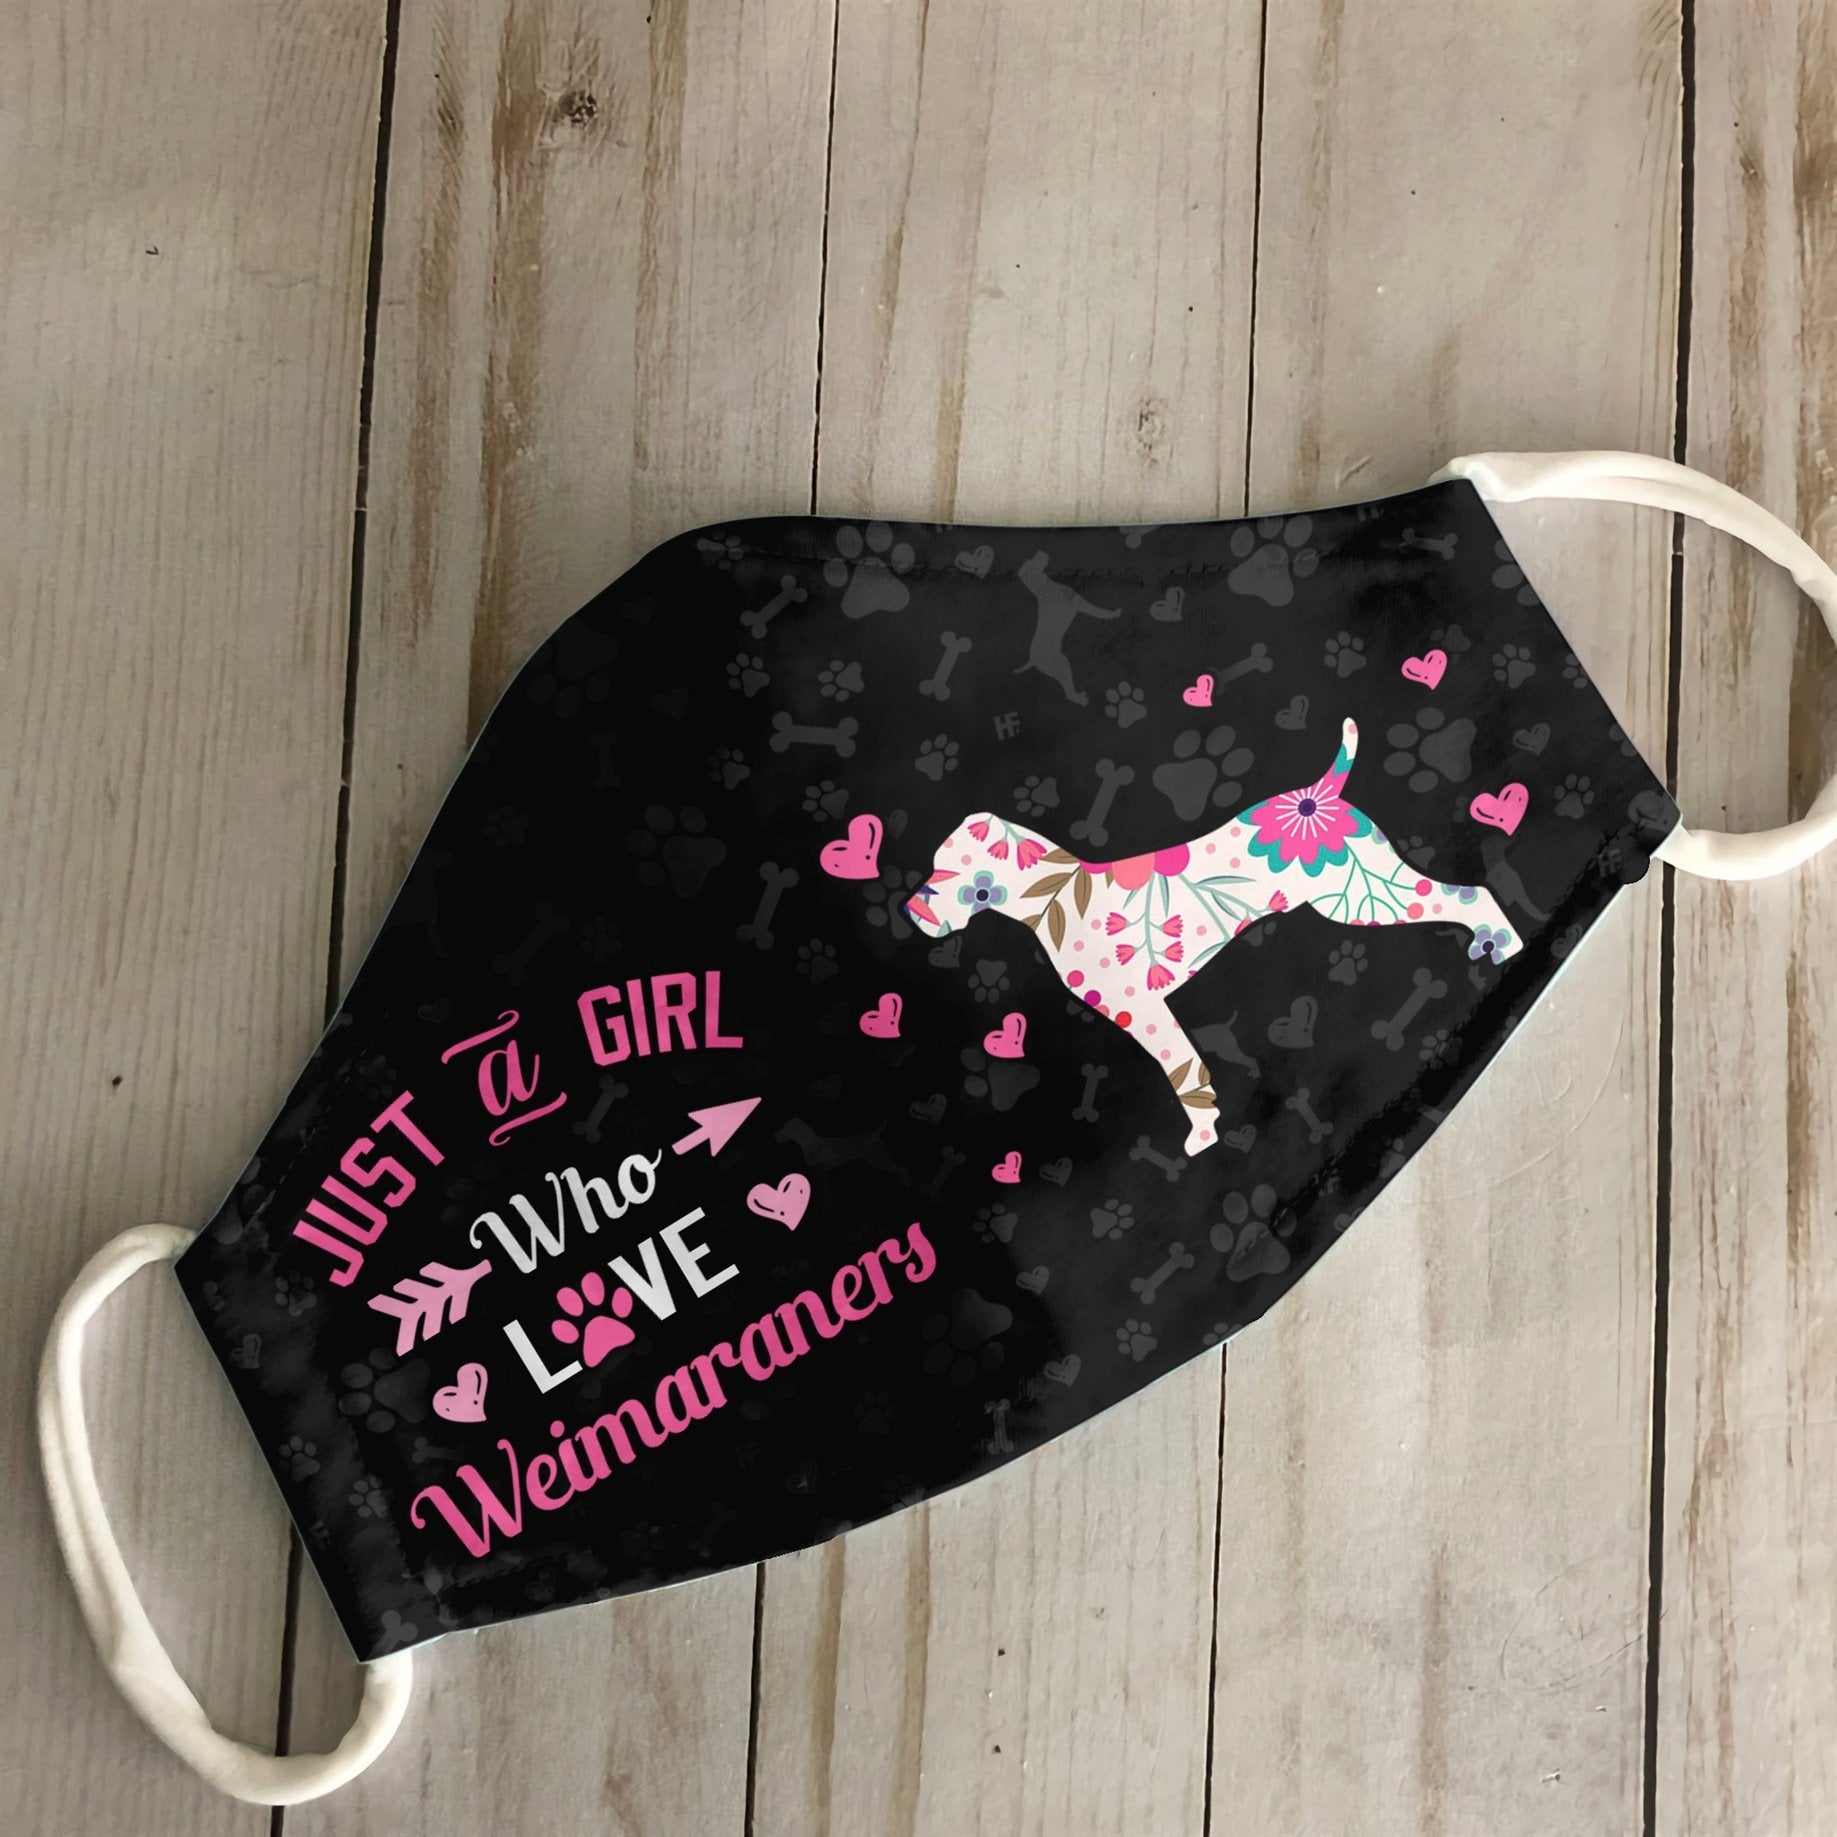 Just A Girl Who Loves Weimaraners EZ07 3107 Face Mask